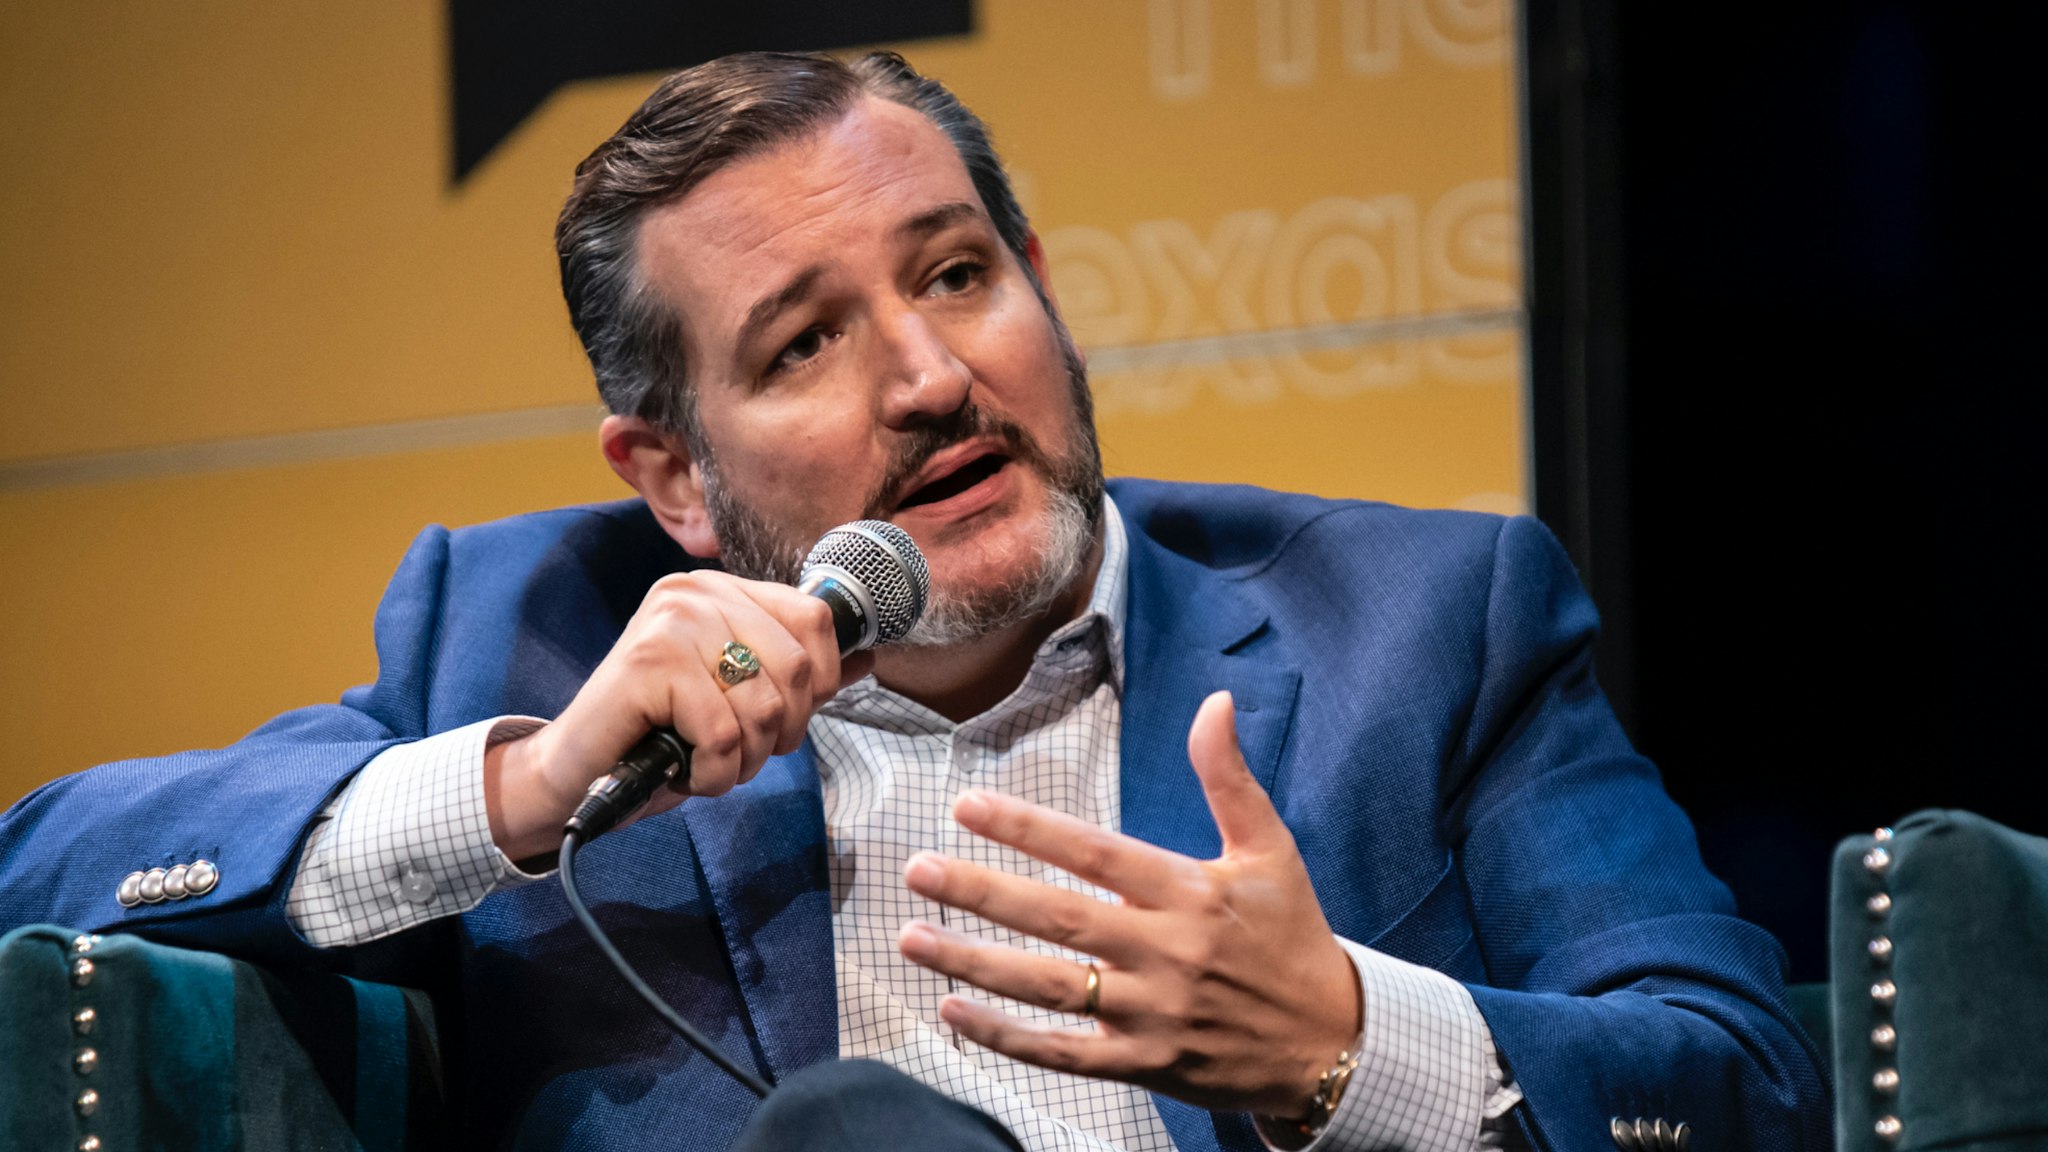 Sen. Ted Cruz (R-TX) answers a question from MSNBC's Chris Hays during a panel at The Texas Tribune Festival on September 28, 2019 in Austin, Texas.